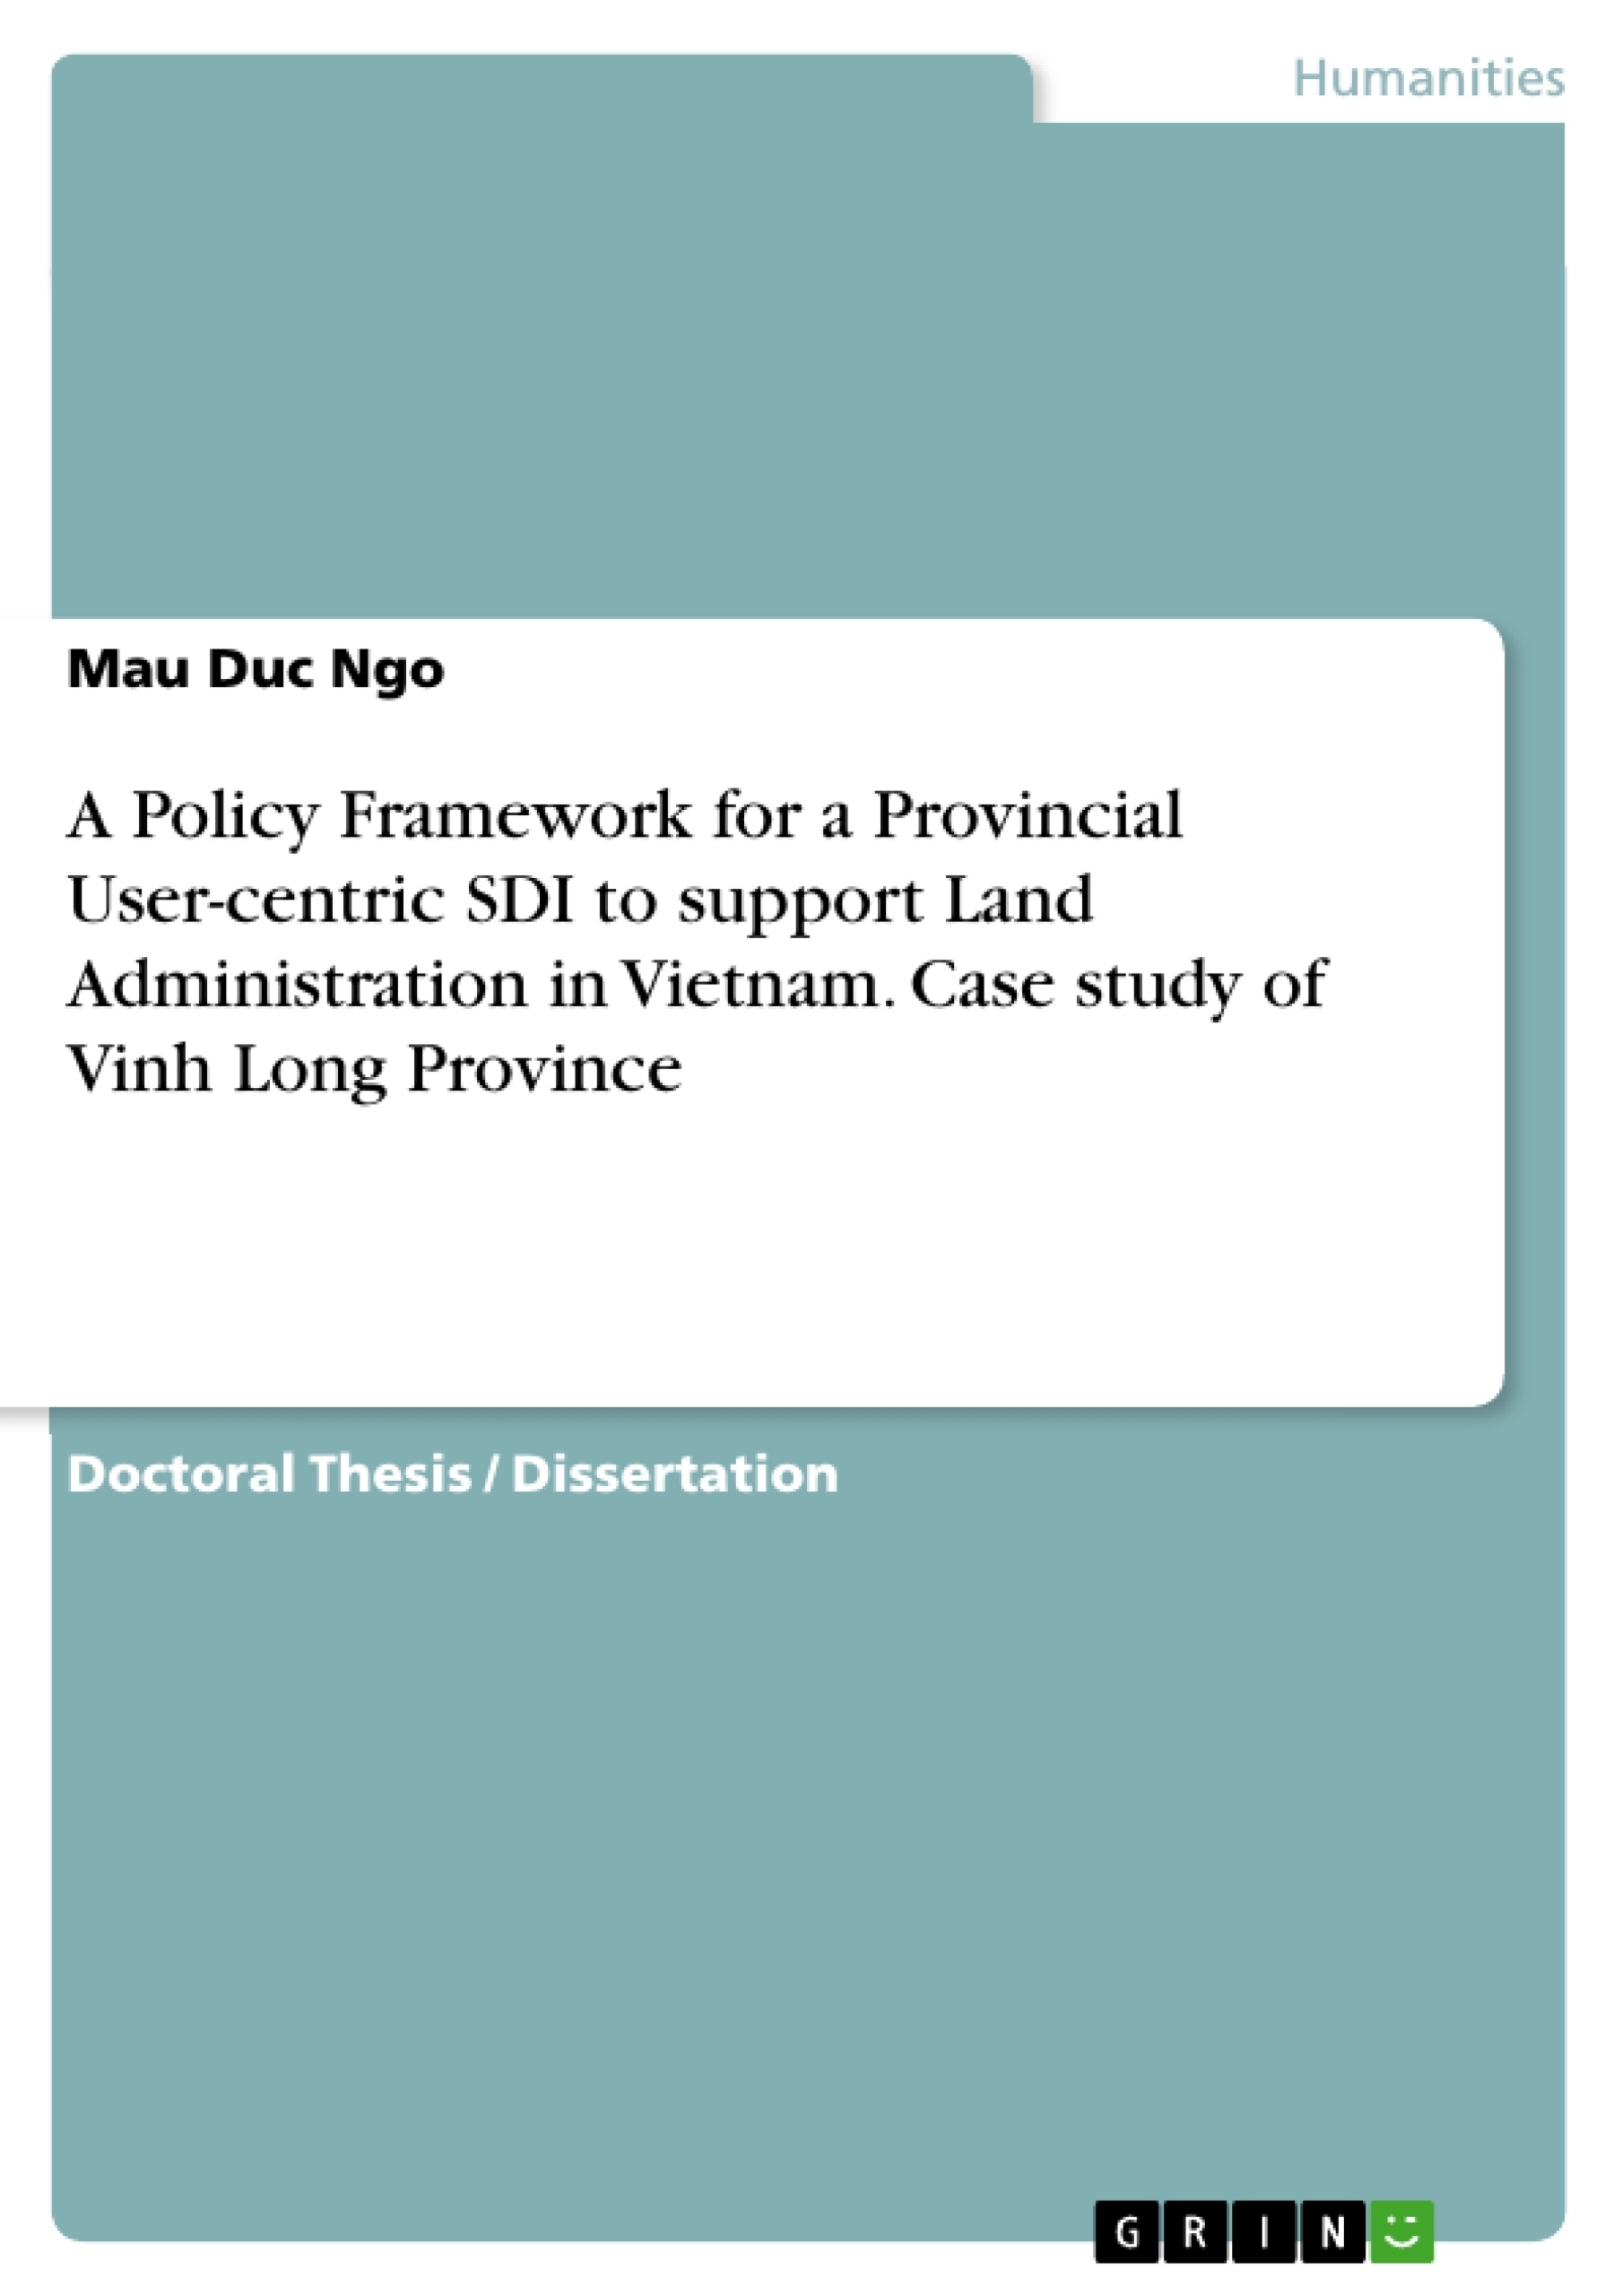 Título: A Policy Framework for a Provincial User-centric SDI to support Land Administration in Vietnam. Case study of Vinh Long Province